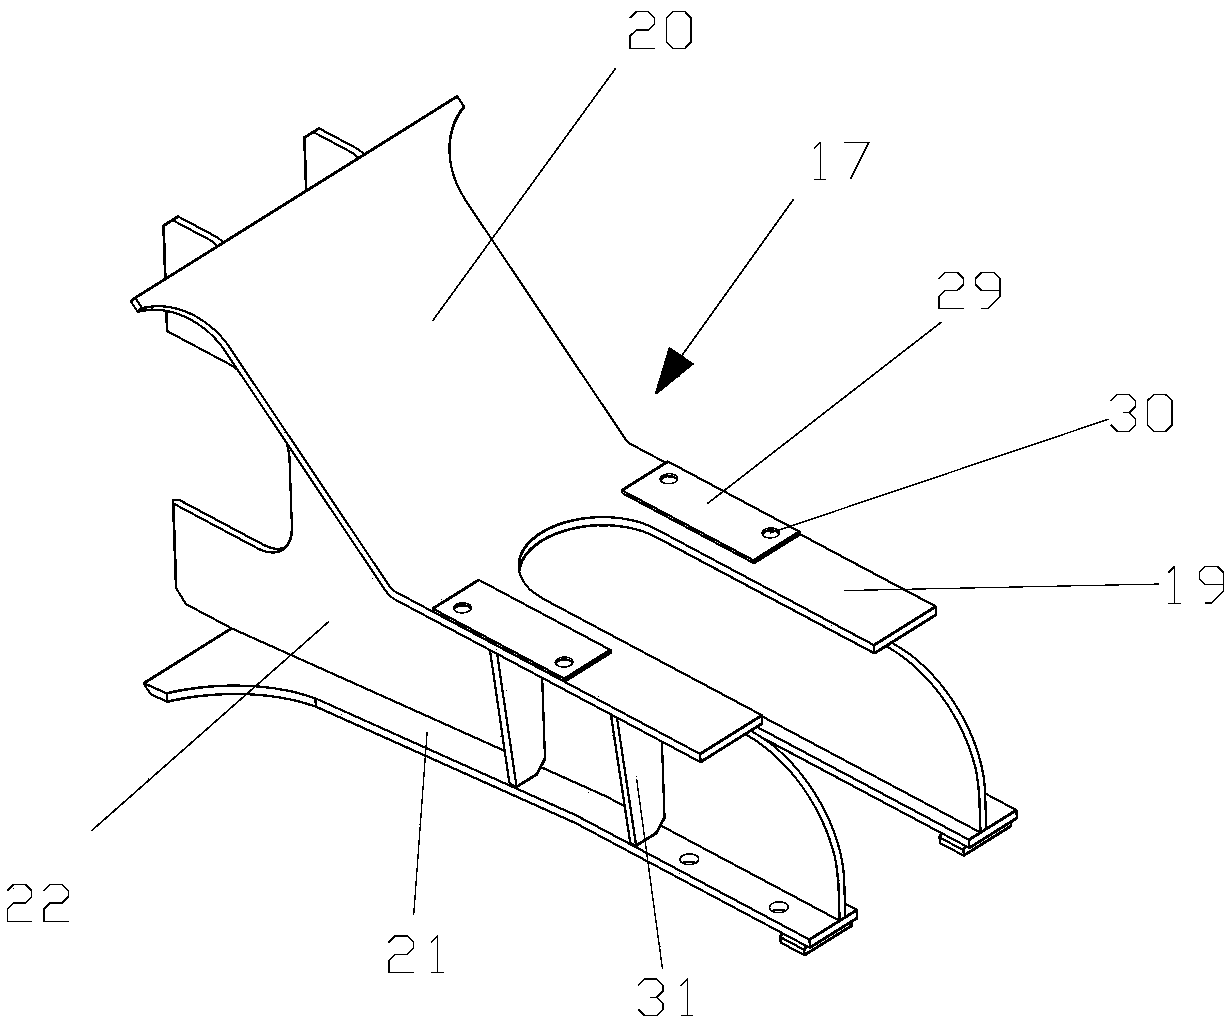 Railway self-rollover chassis